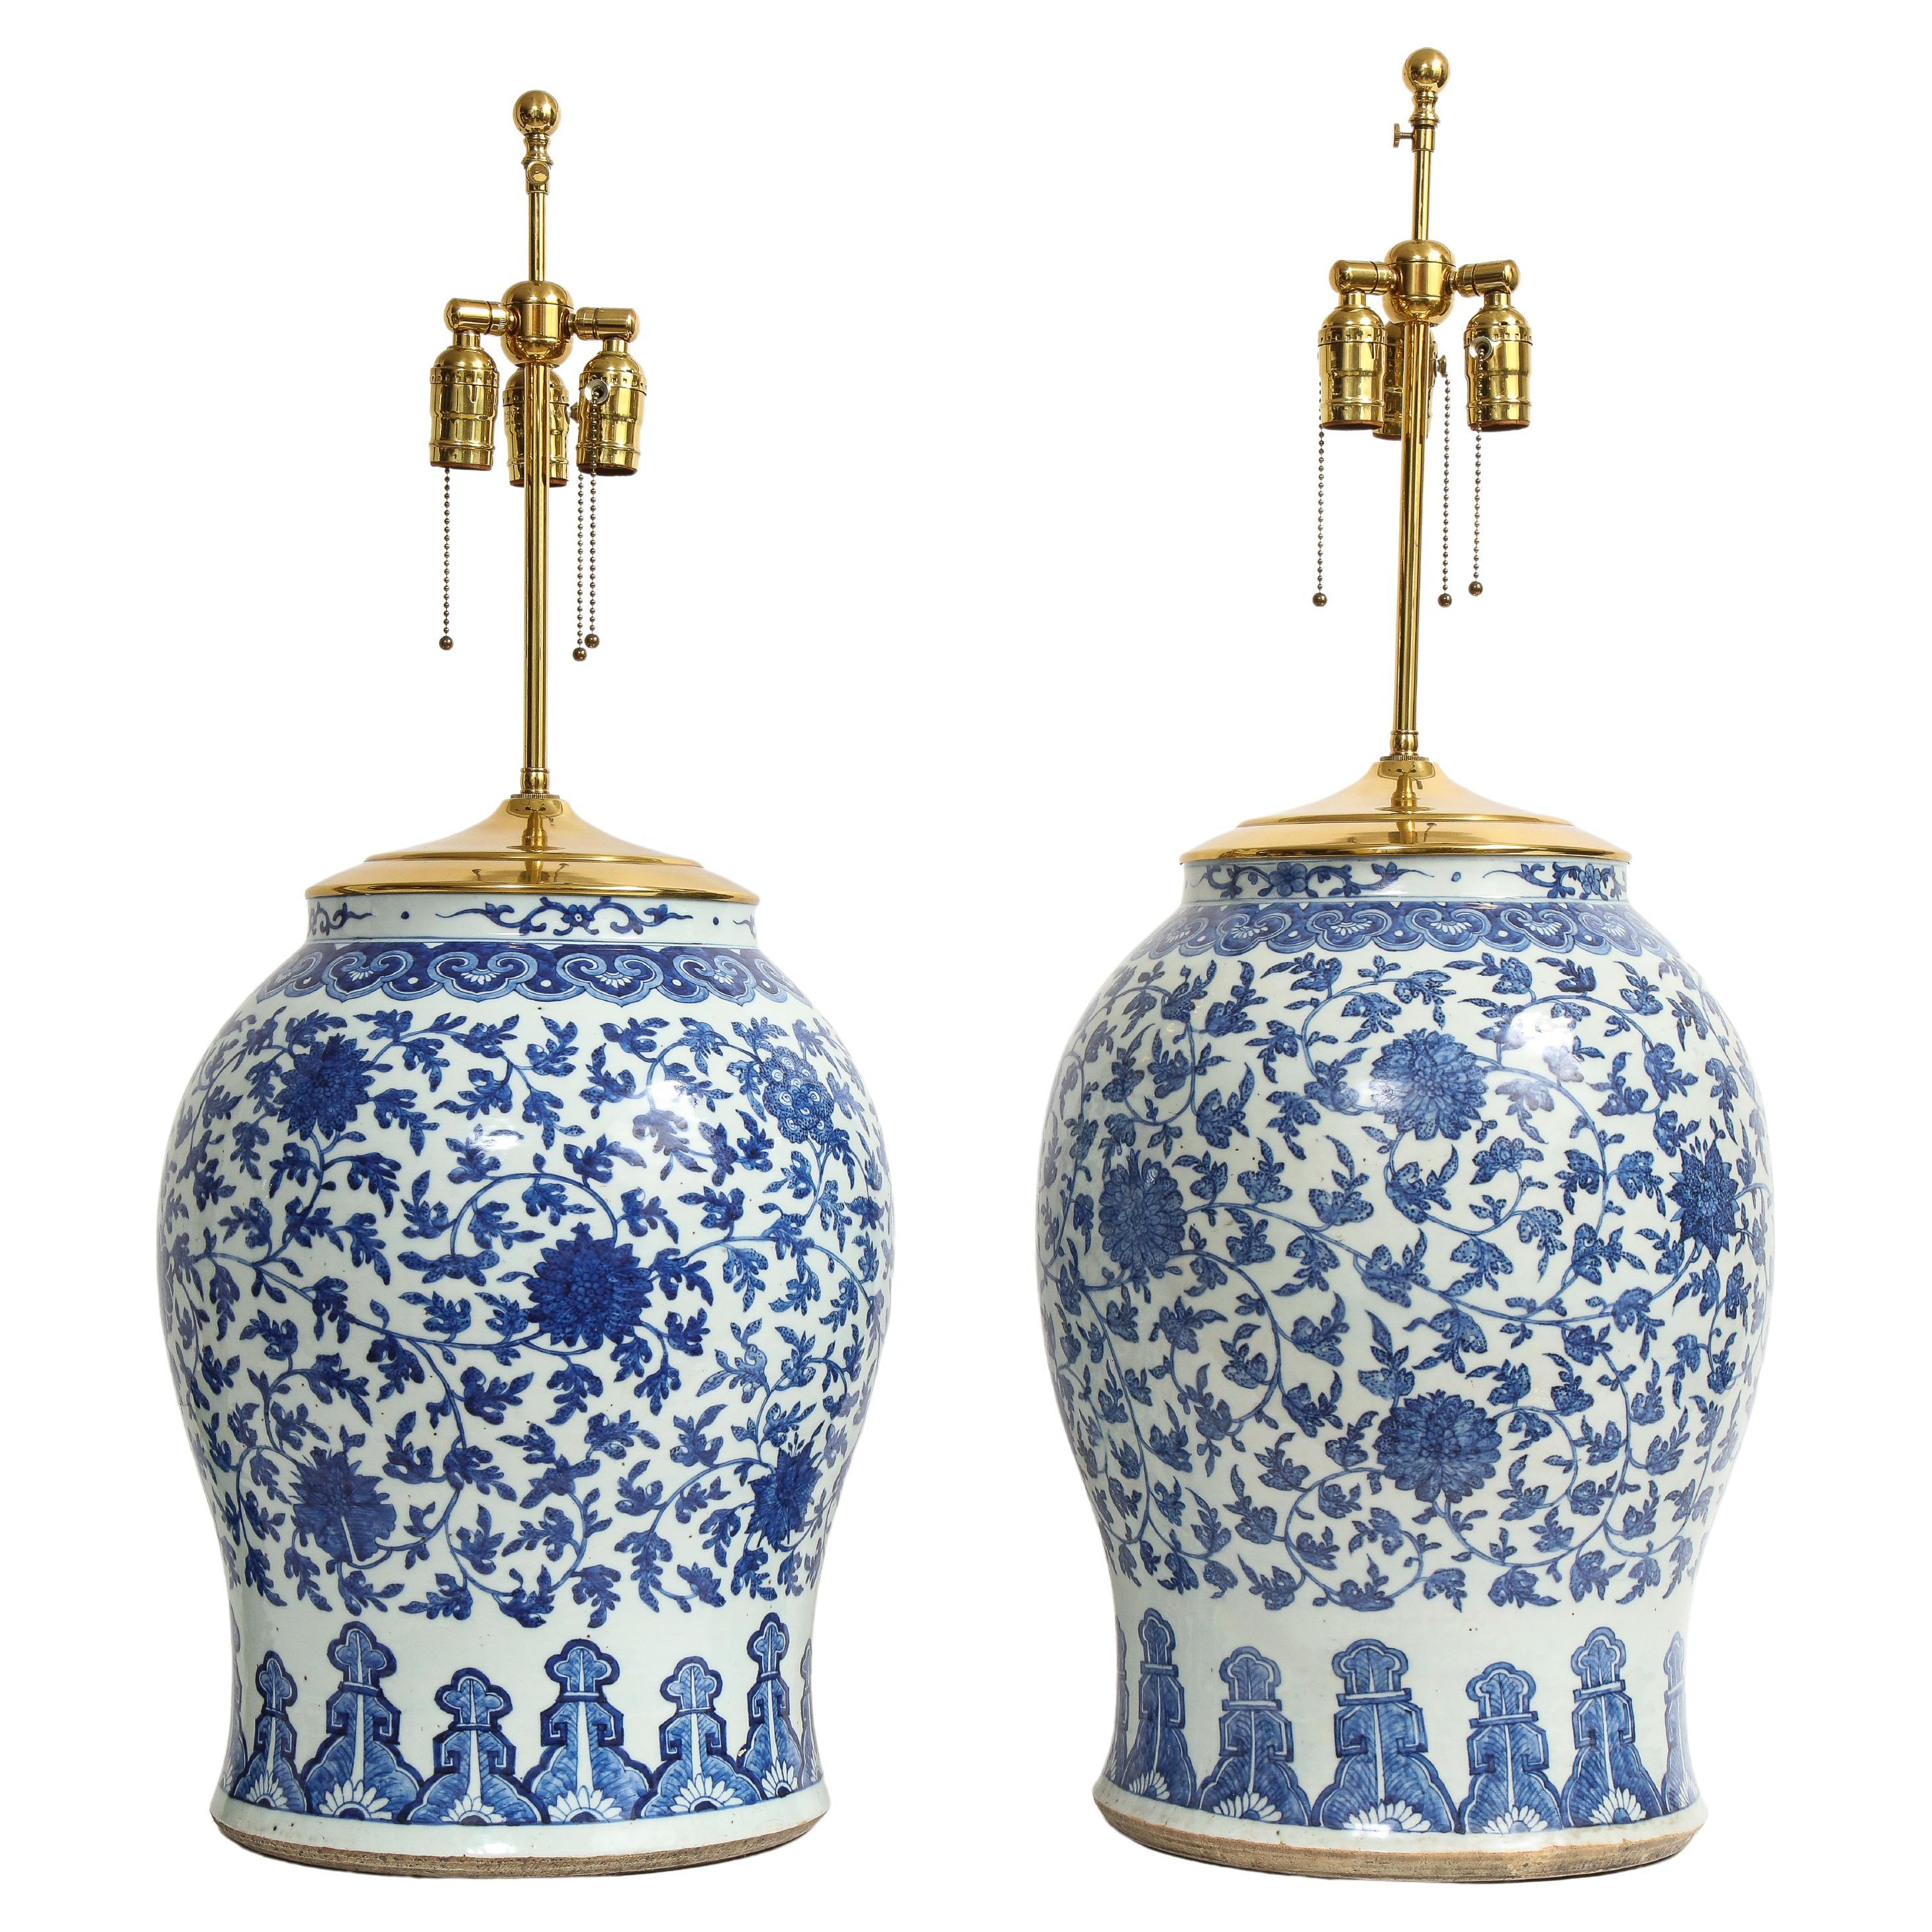 Pair of 19th Century Qing Dynasty Chinese Blue and White Vases Turned to Lamps For Sale